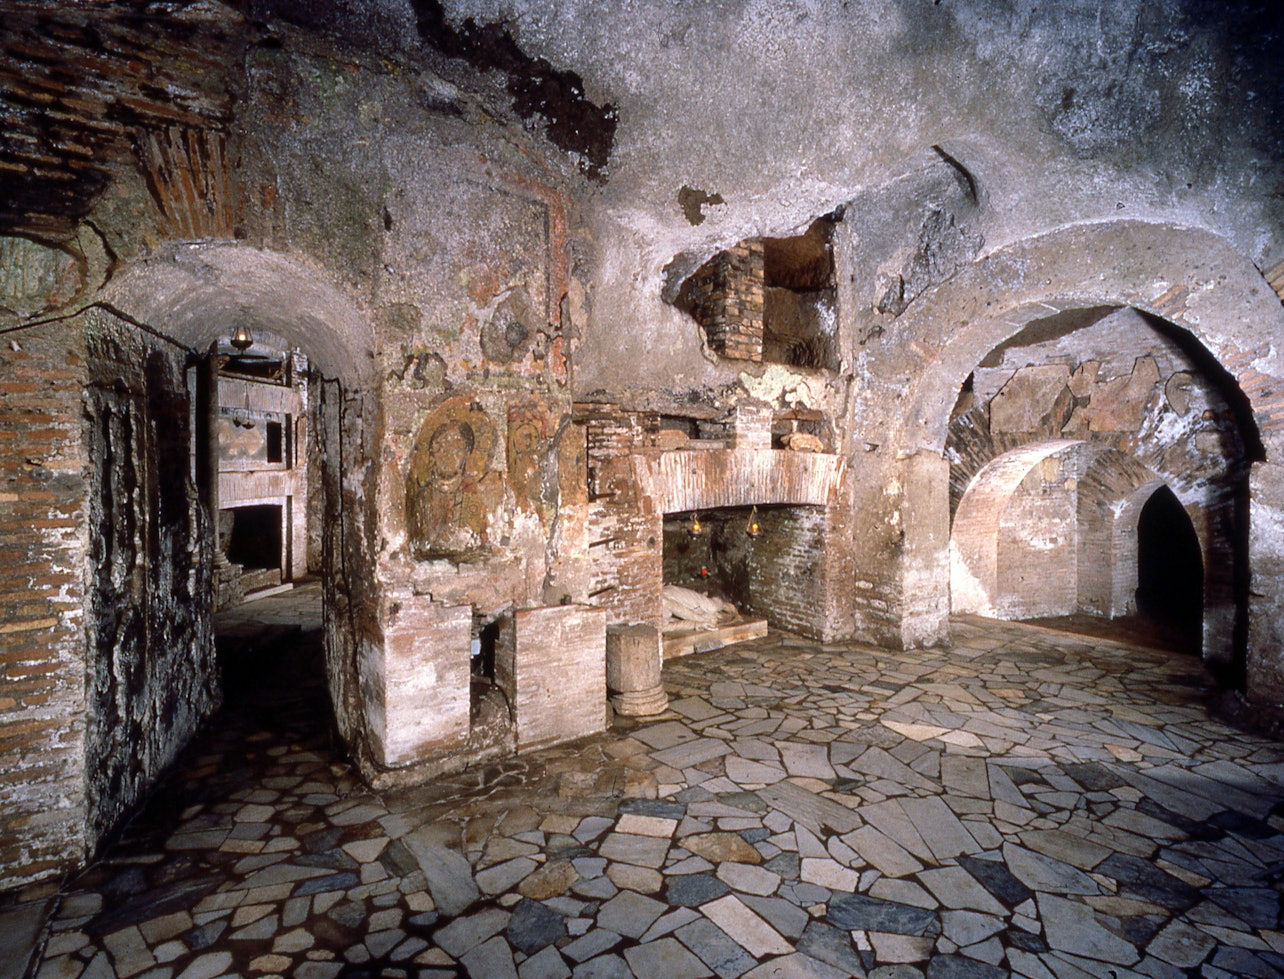 Catacombs of St. Callixtus: Guided Tour - Accommodations in Rome